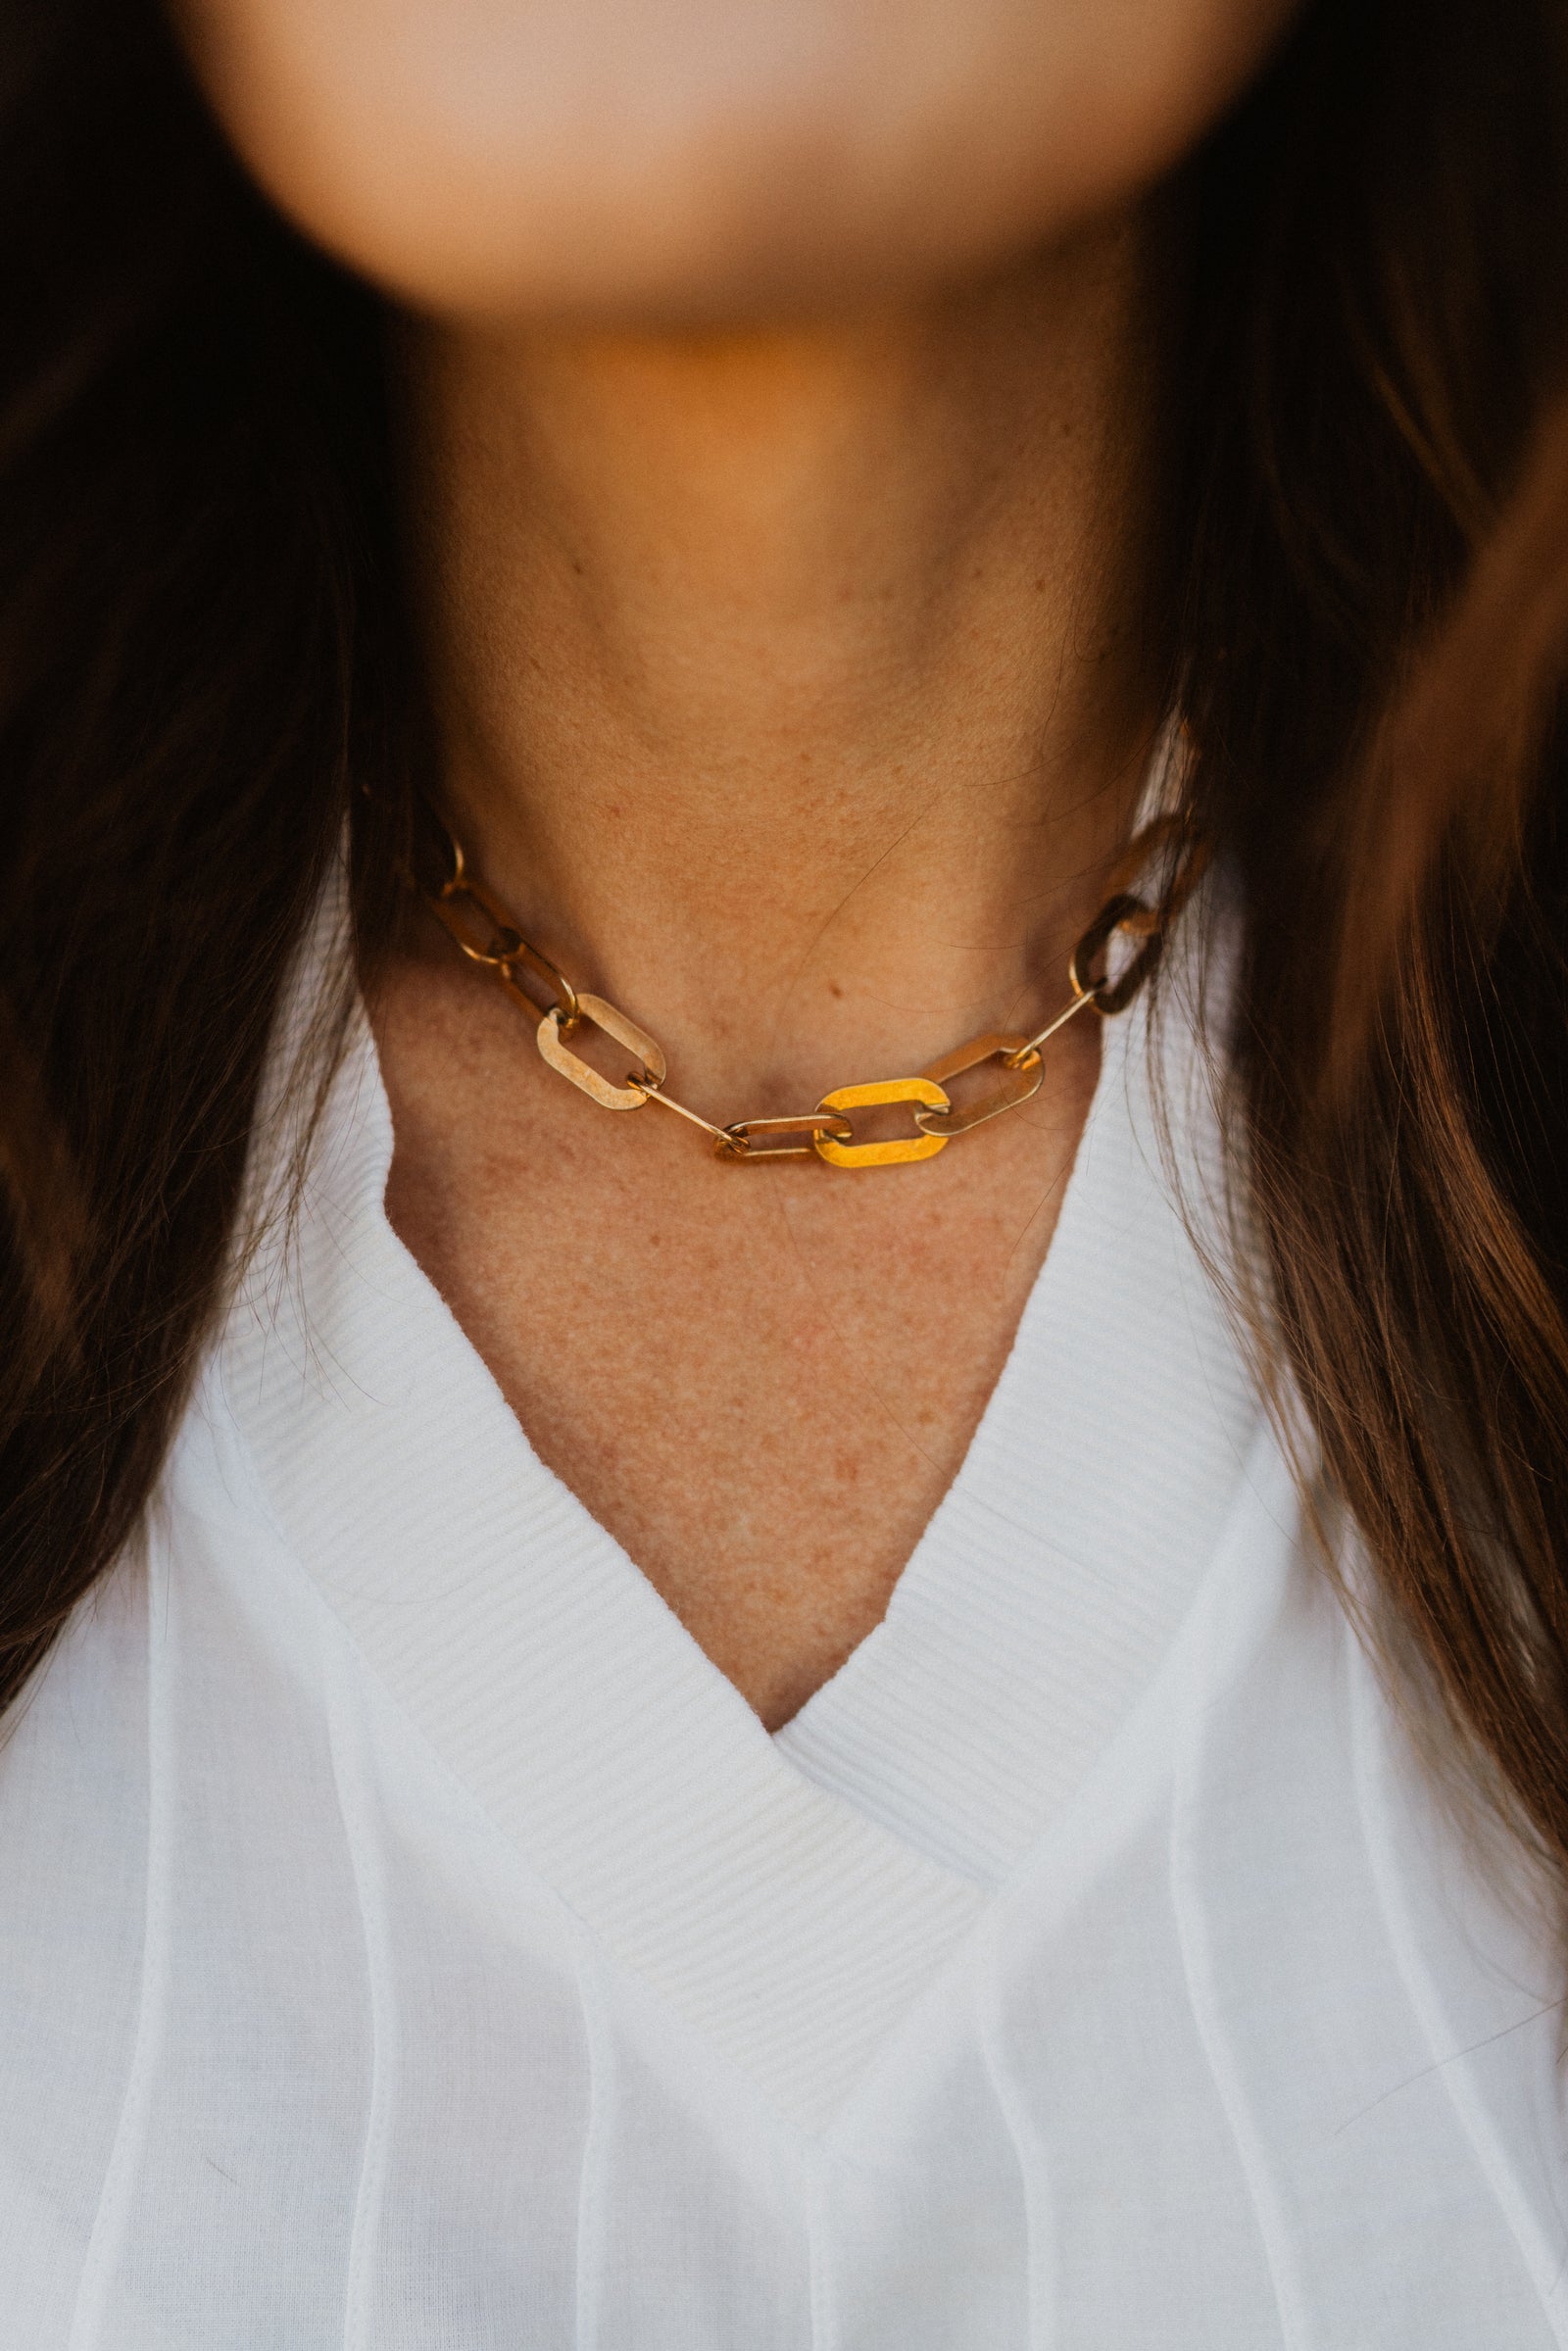 Prudent Necklace